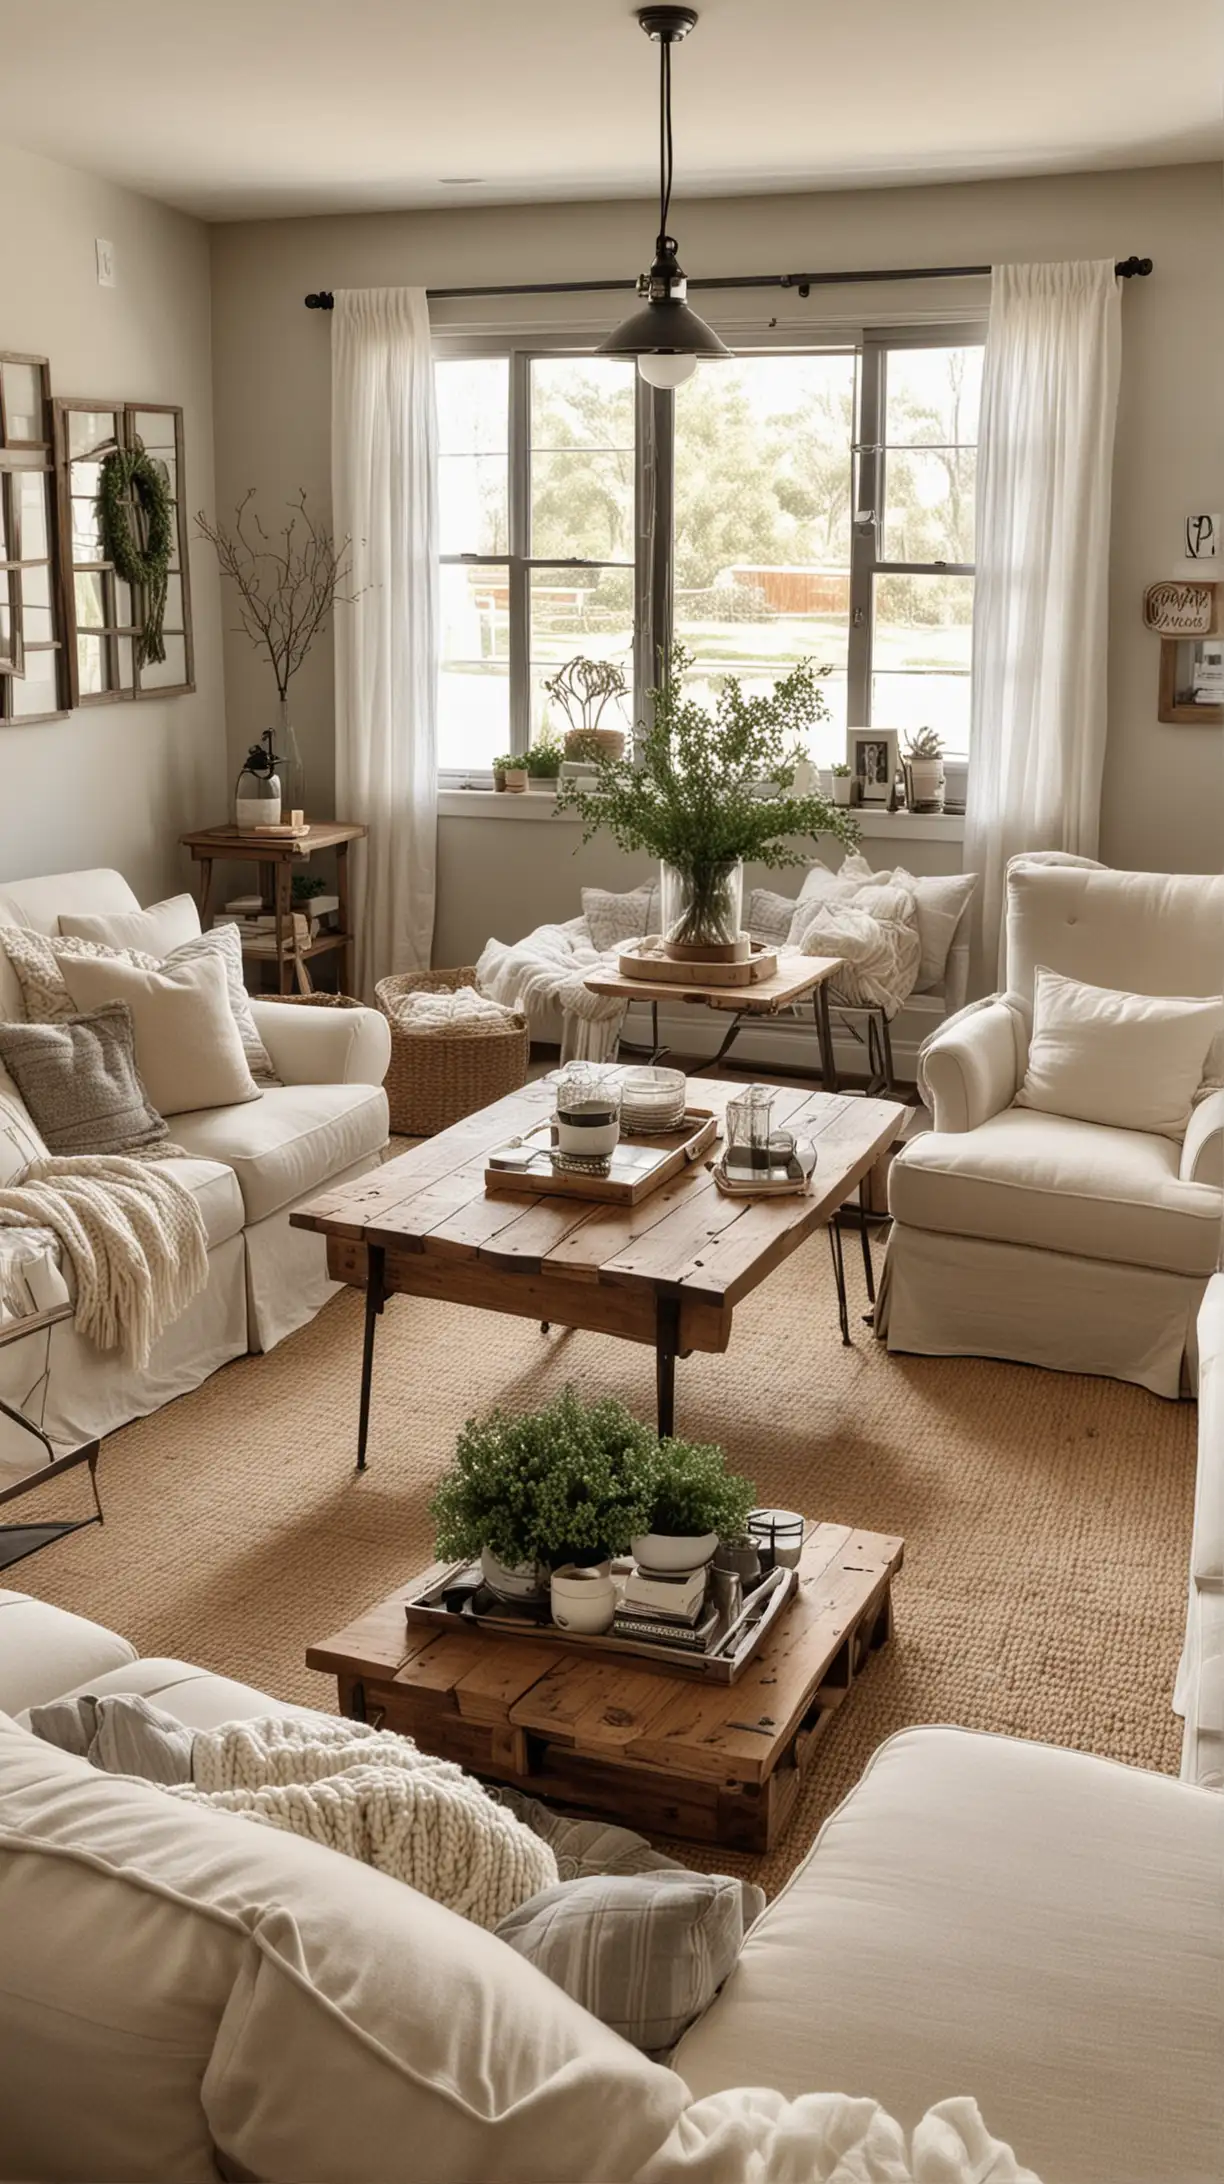 A living room featuring a robust farmhouse table used as a central coffee table, surrounded by a cozy seating arrangement, embodying a rustic yet stylish decor.